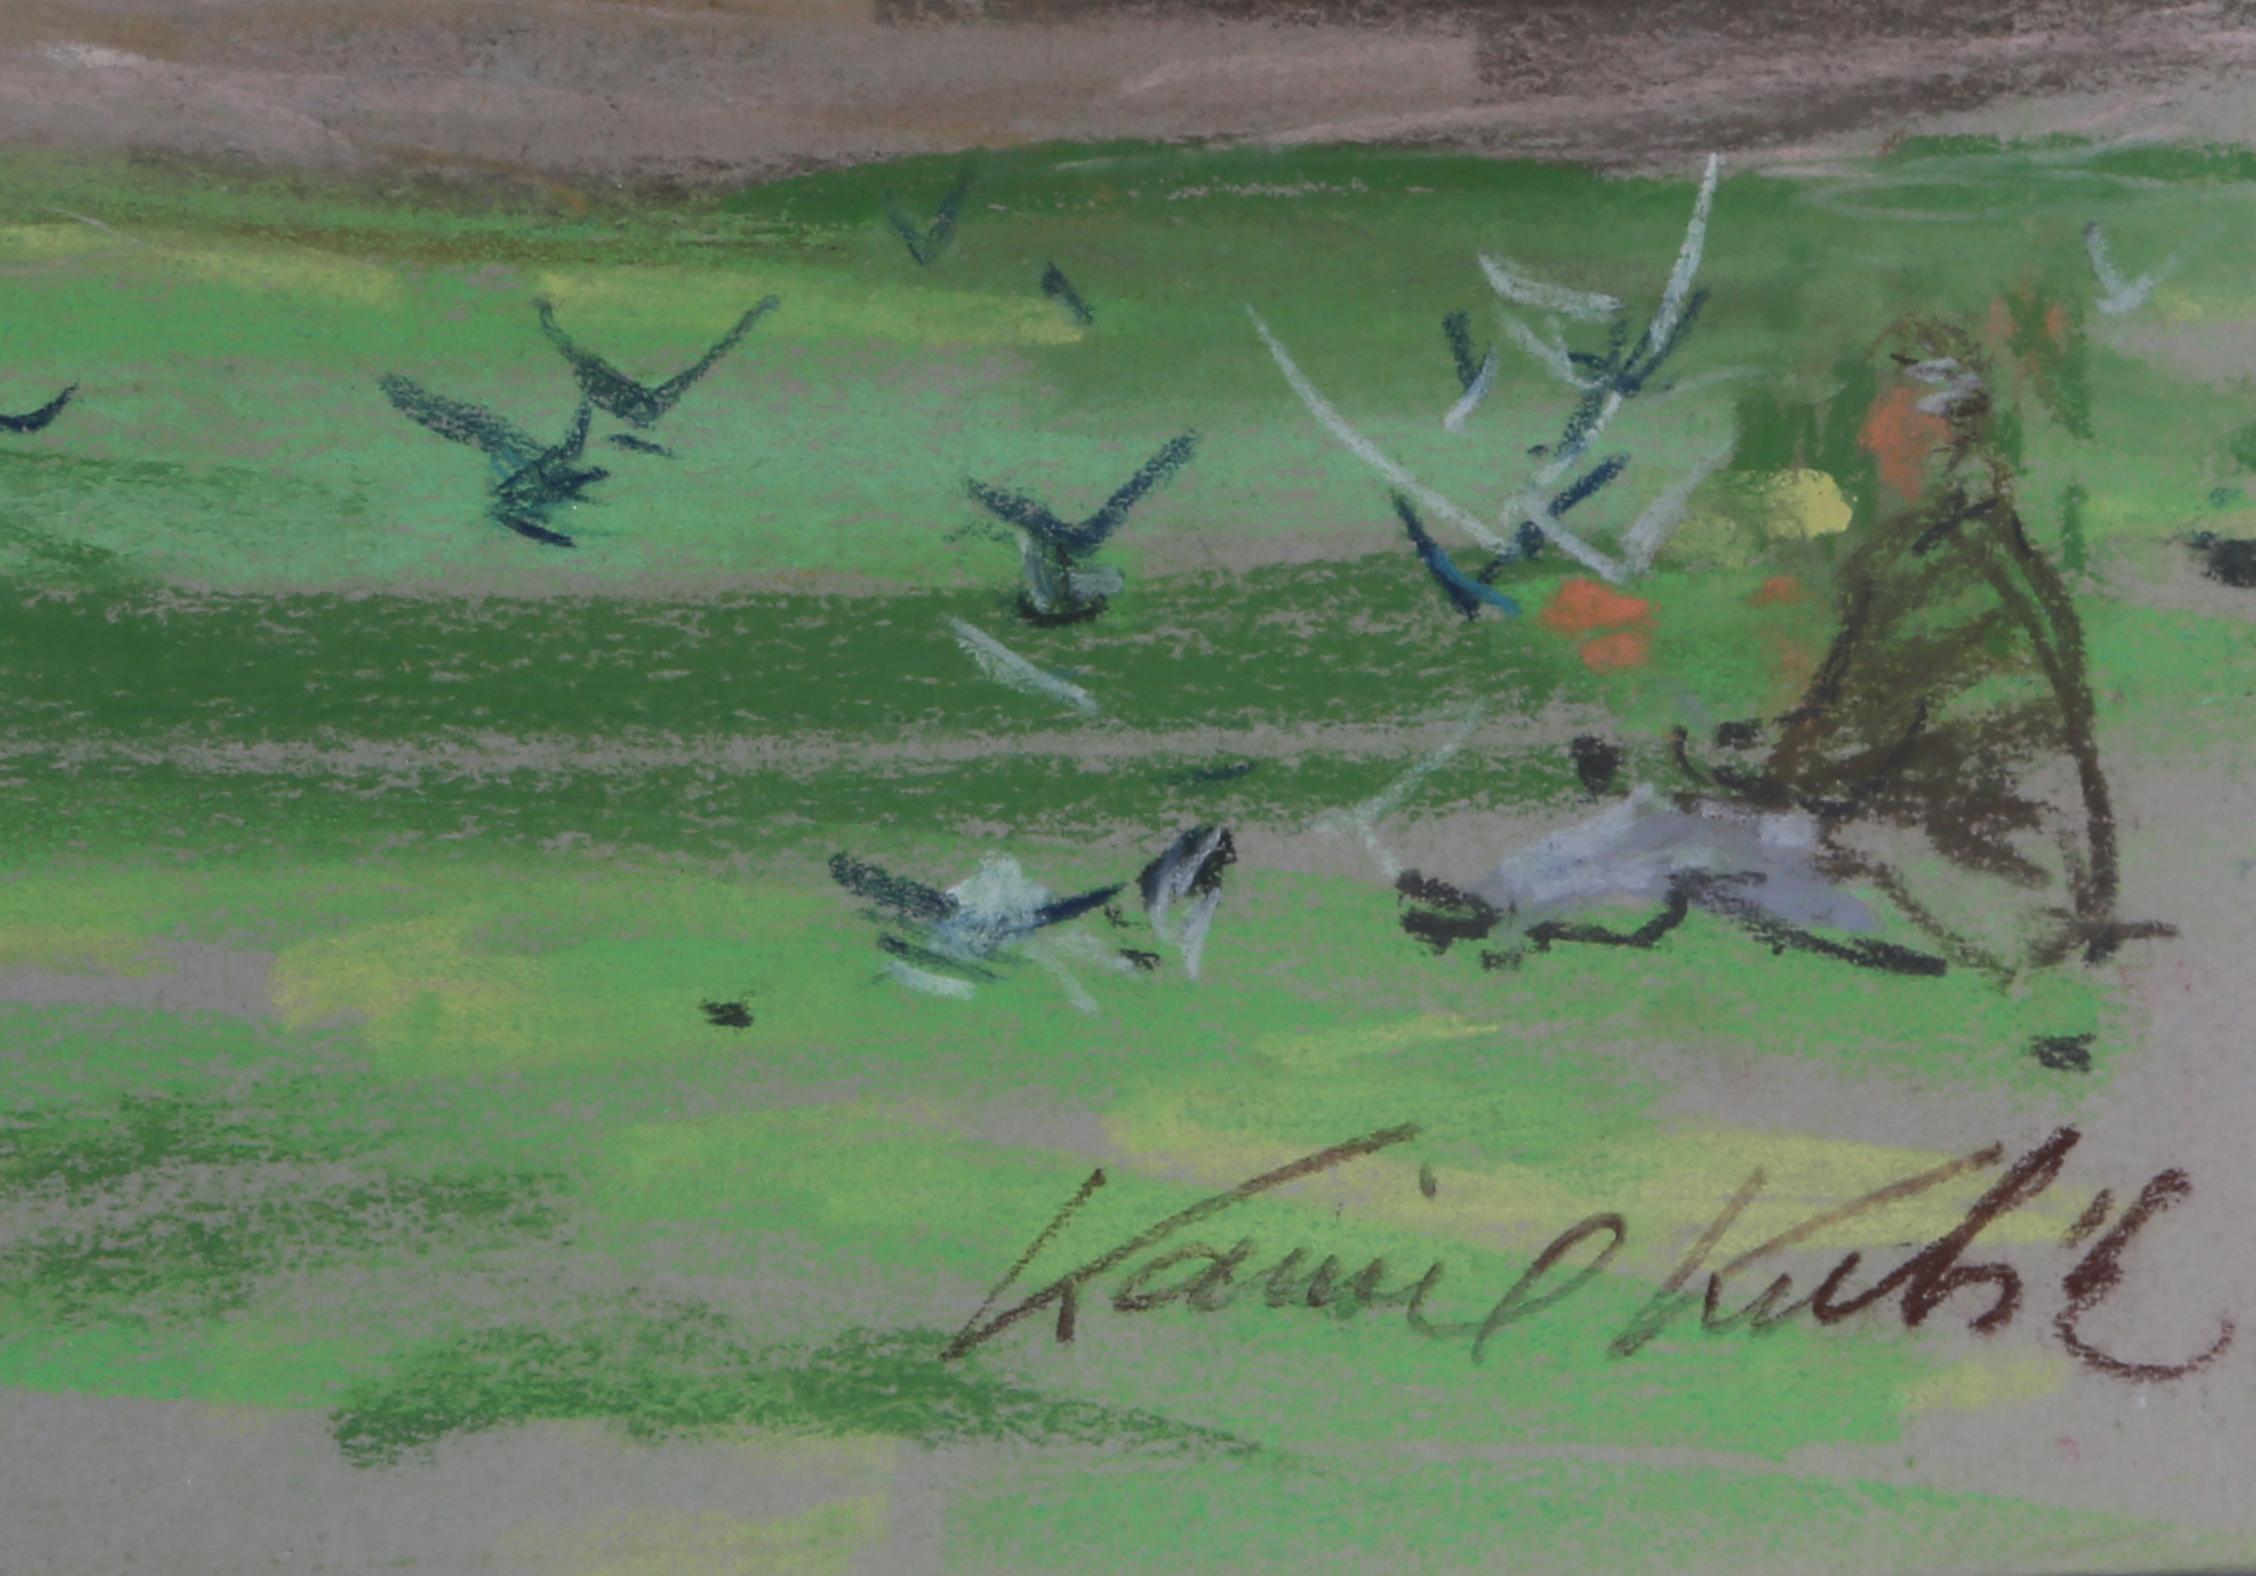 Band in the Park, London by Kamil Kubik, Czech/American (1930–2011)
Pastel on Paper, signed l.r.
Size: 19.5 x 25.5 in. (49.53 x 64.77 cm)